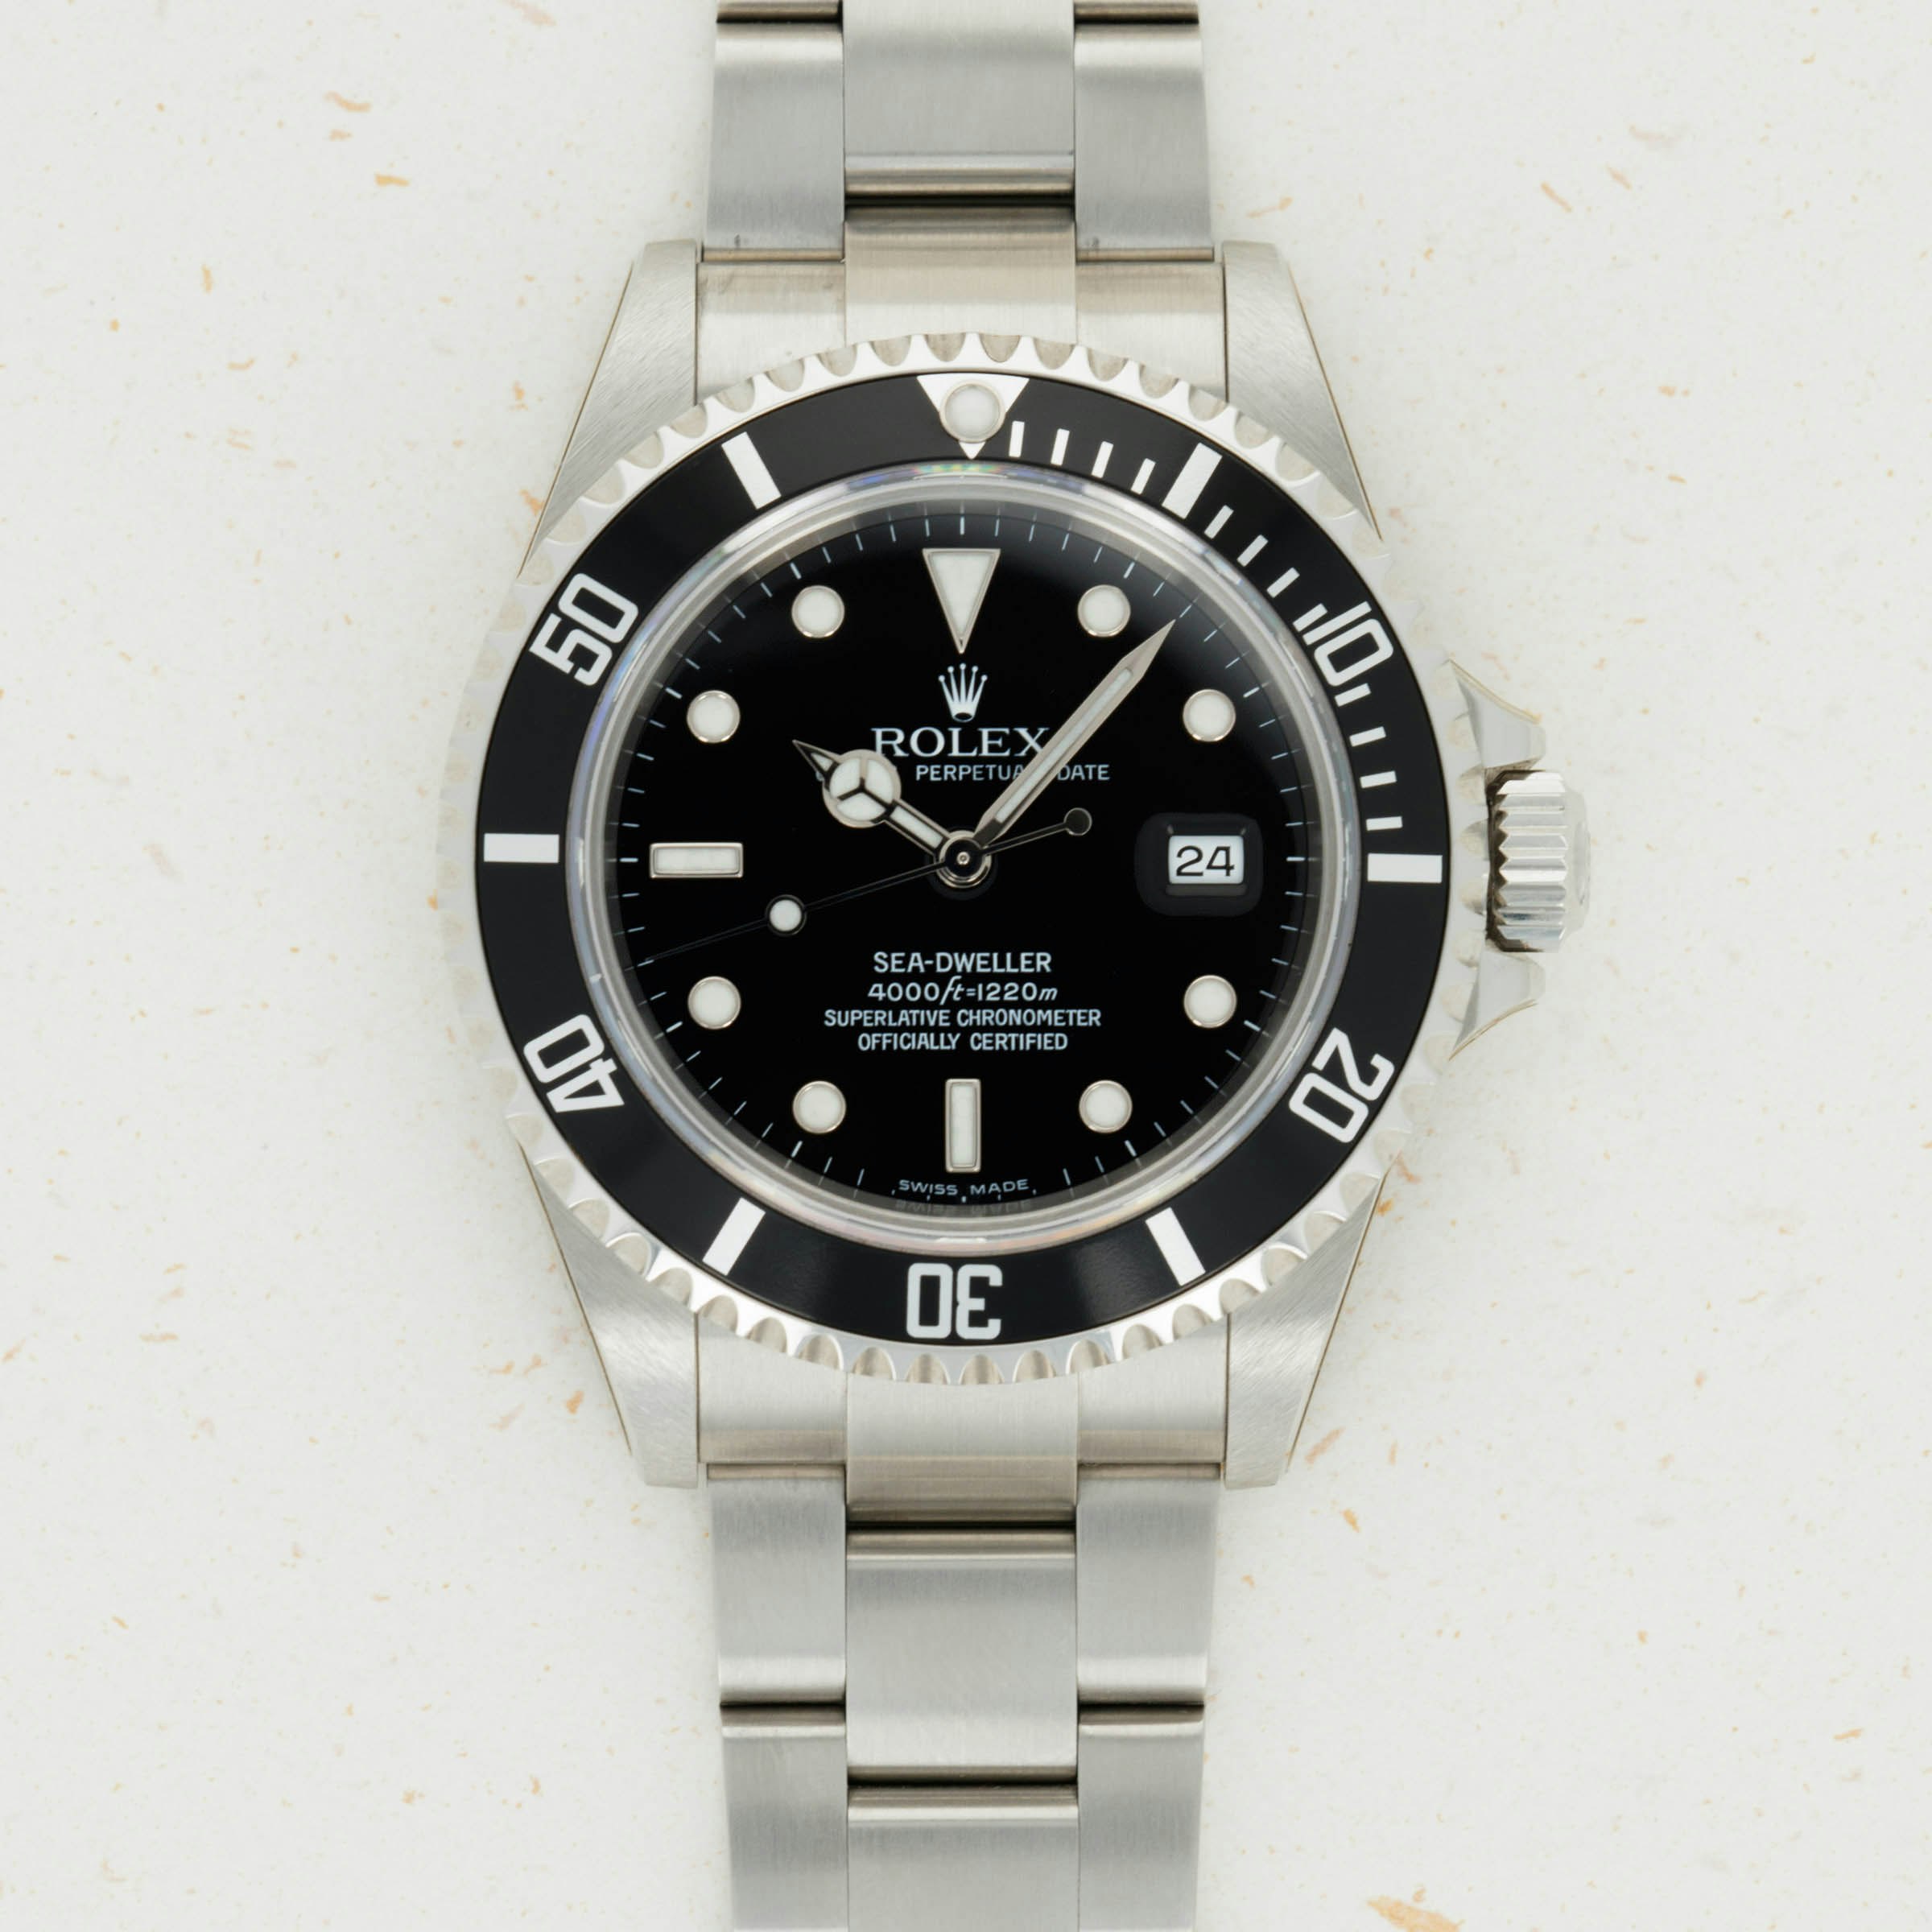 Thumbnail for Rolex Sea-Dweller 16600 Box and Papers